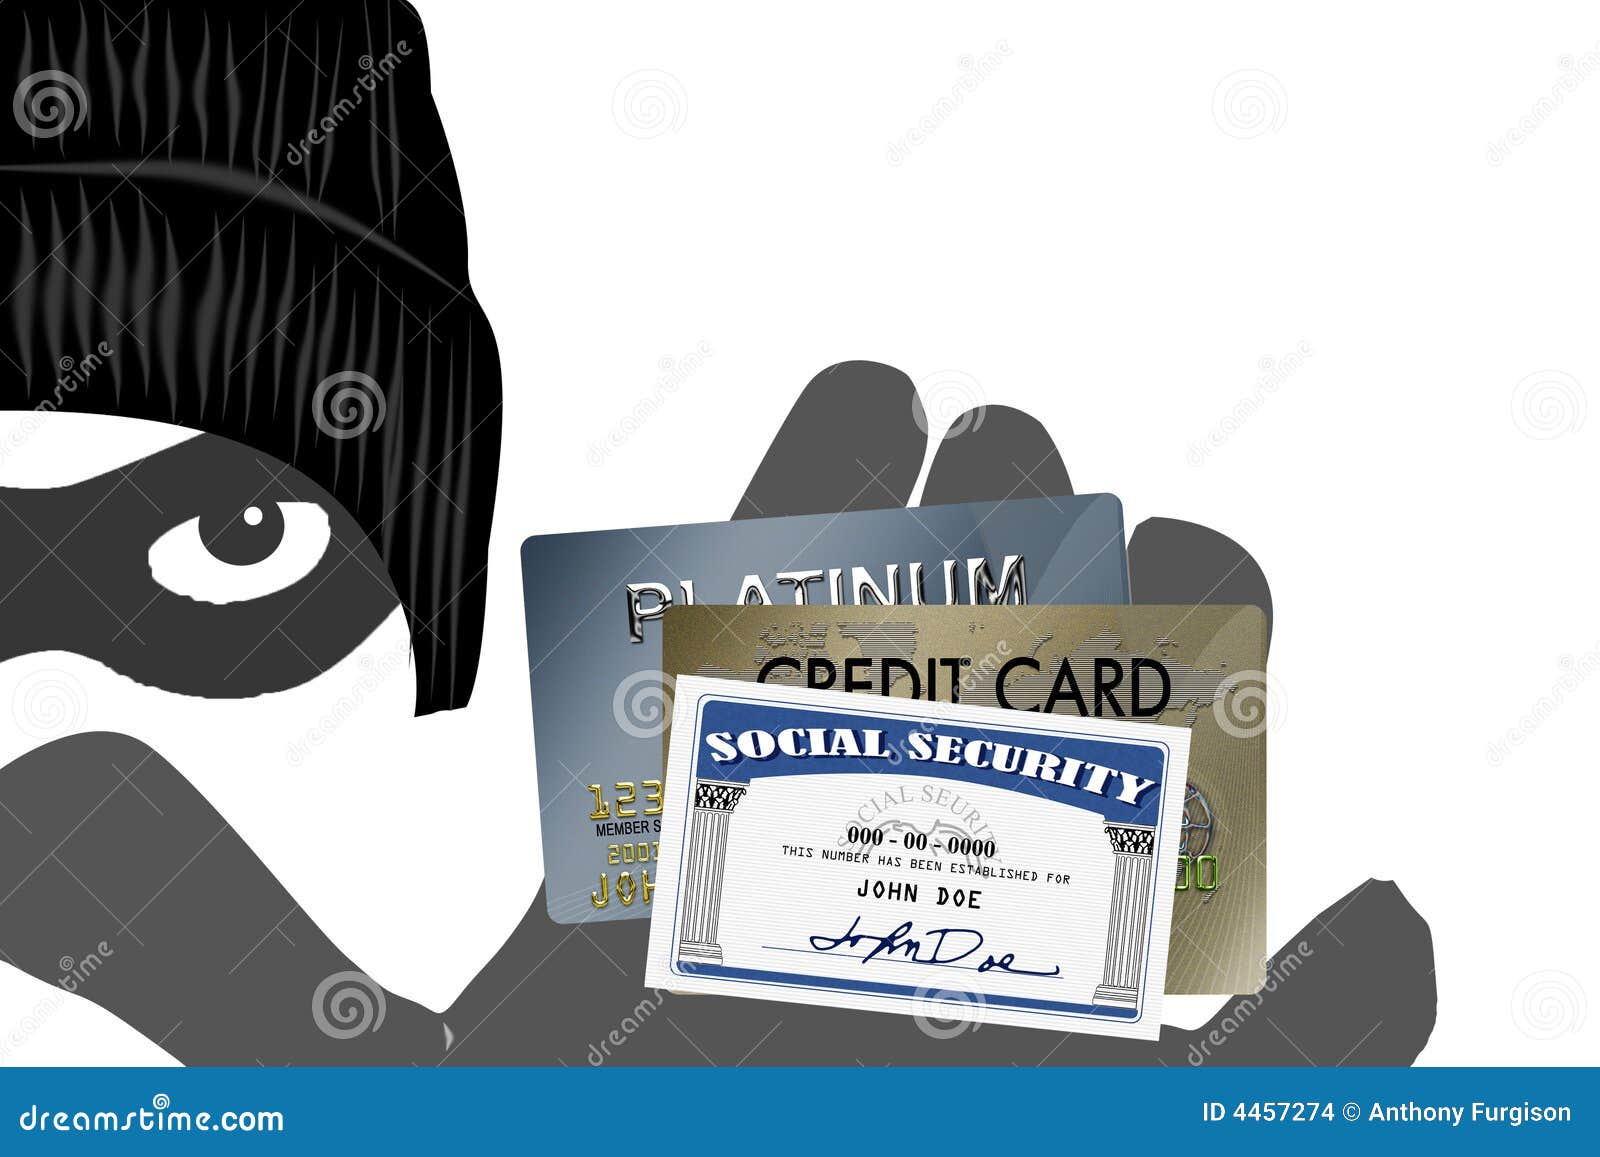 What Is Identity Theft Protection